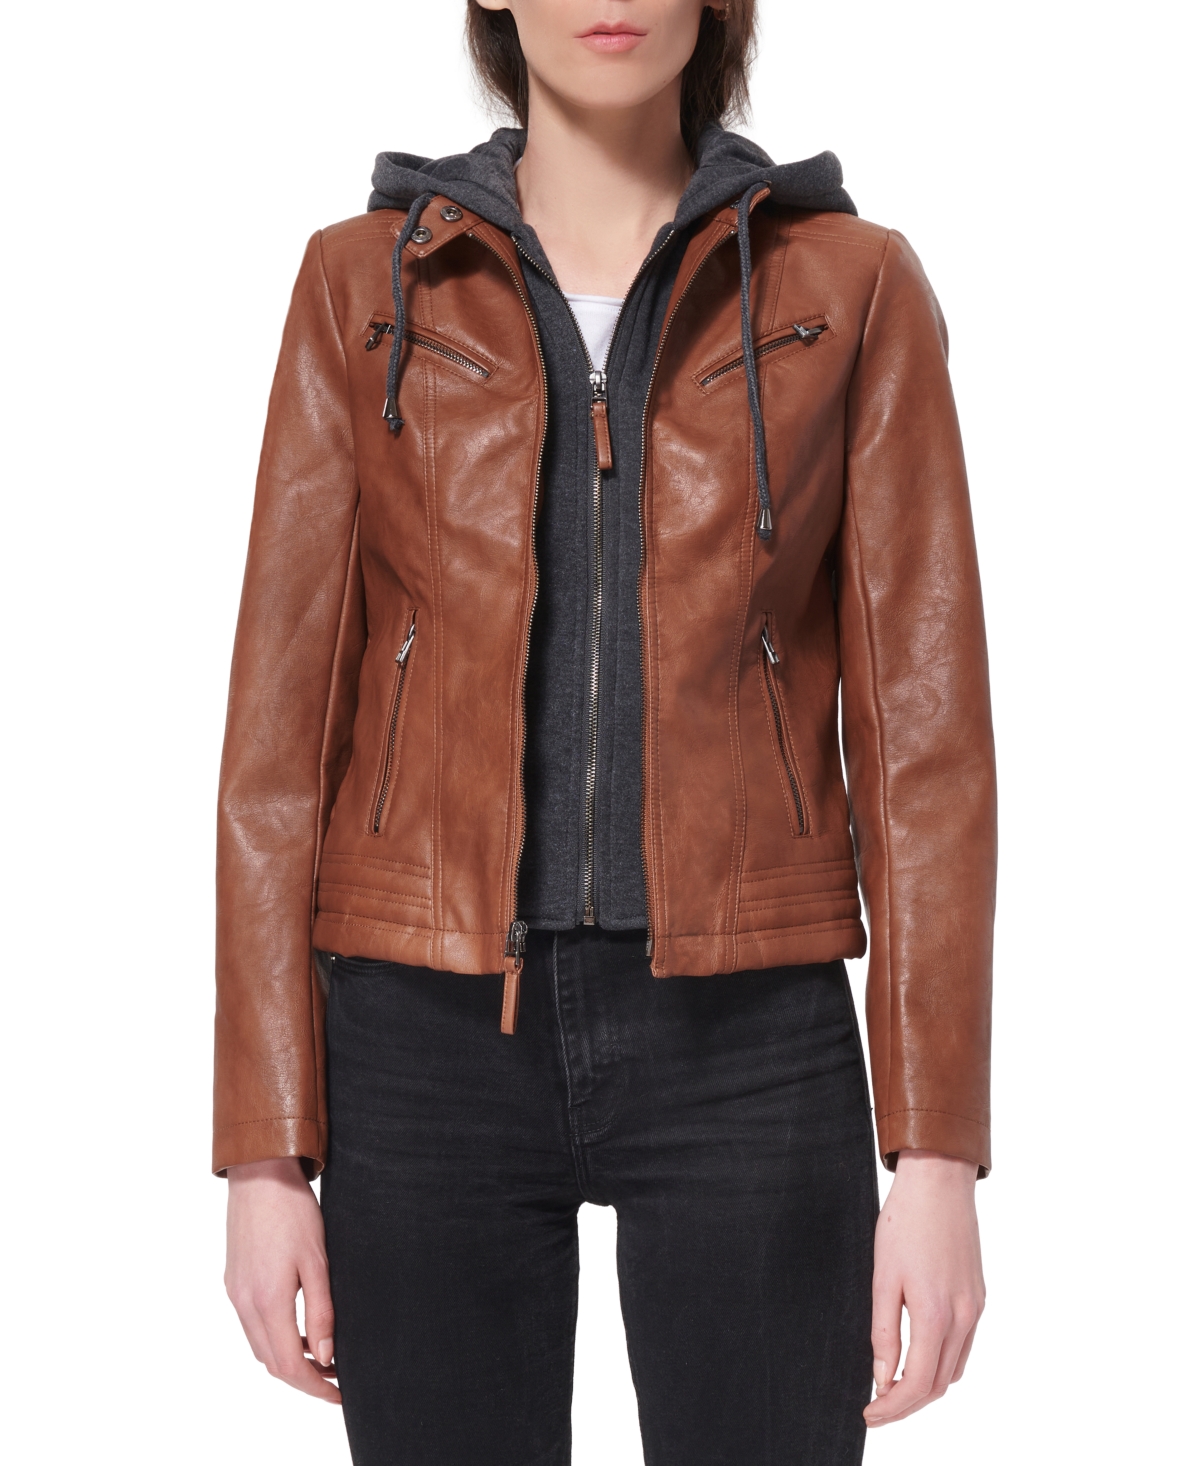 Maralyn & Me Juniors' Layered-Look Faux-Leather Coat